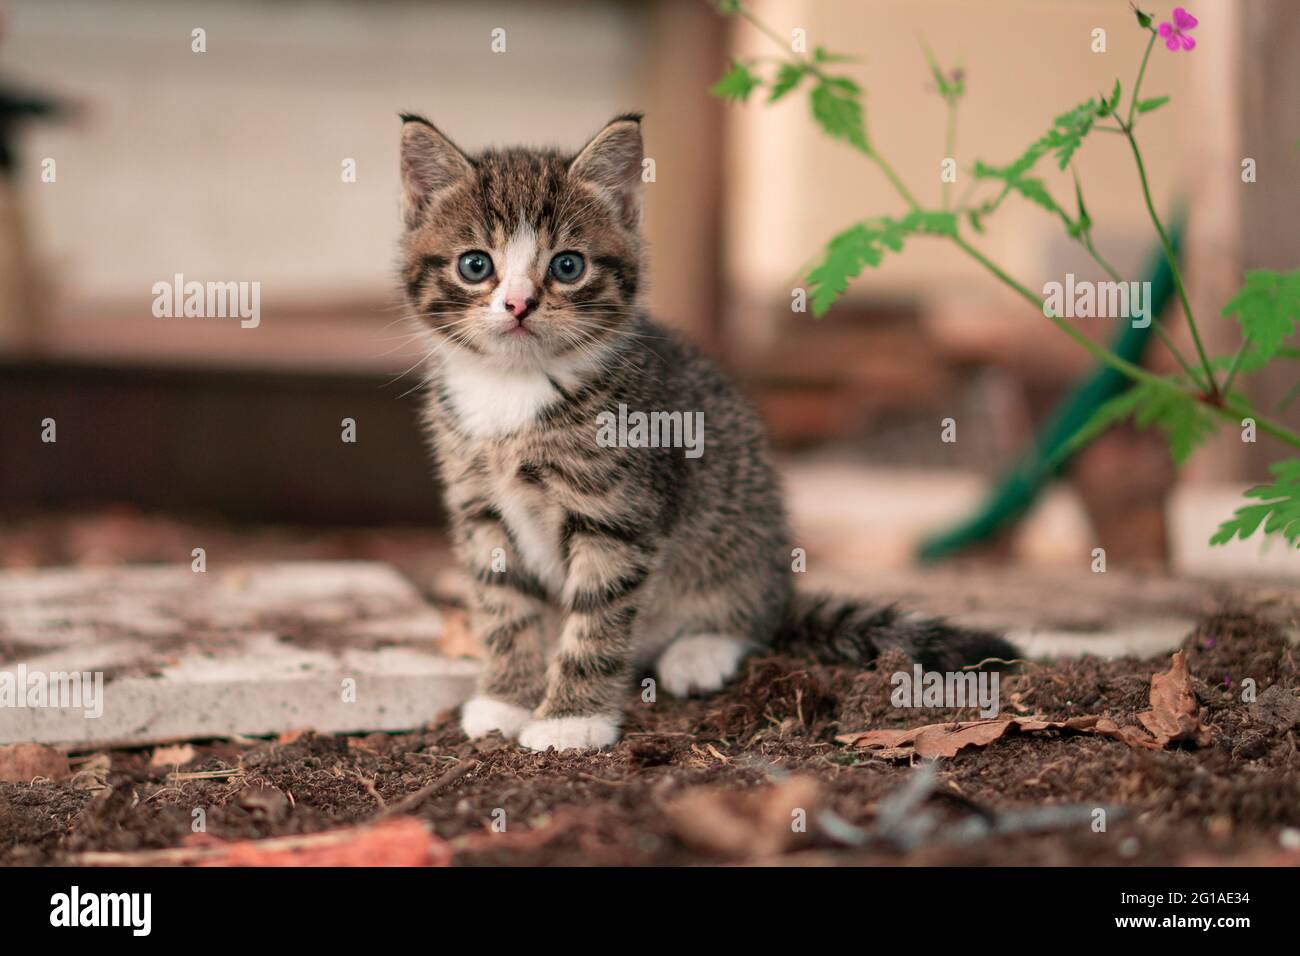 Kitten with blue eyes sitting on dirt. Small Cat Baby with a small flower next to it. Stock Photo